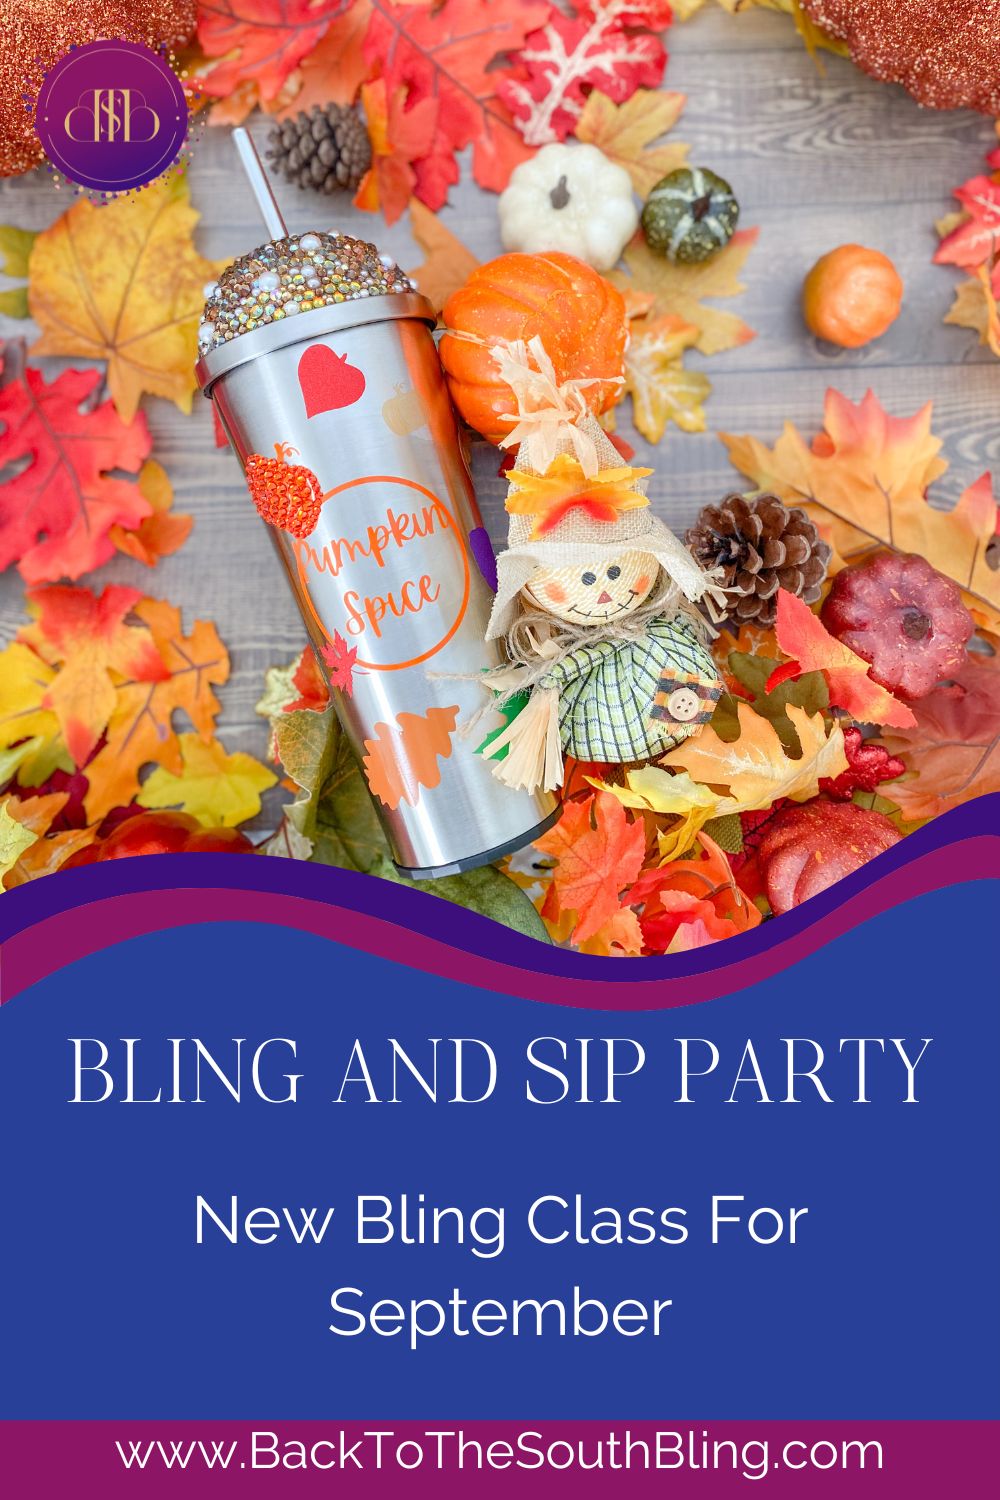 New Bling and Sip Party: Fall In Love With Bling